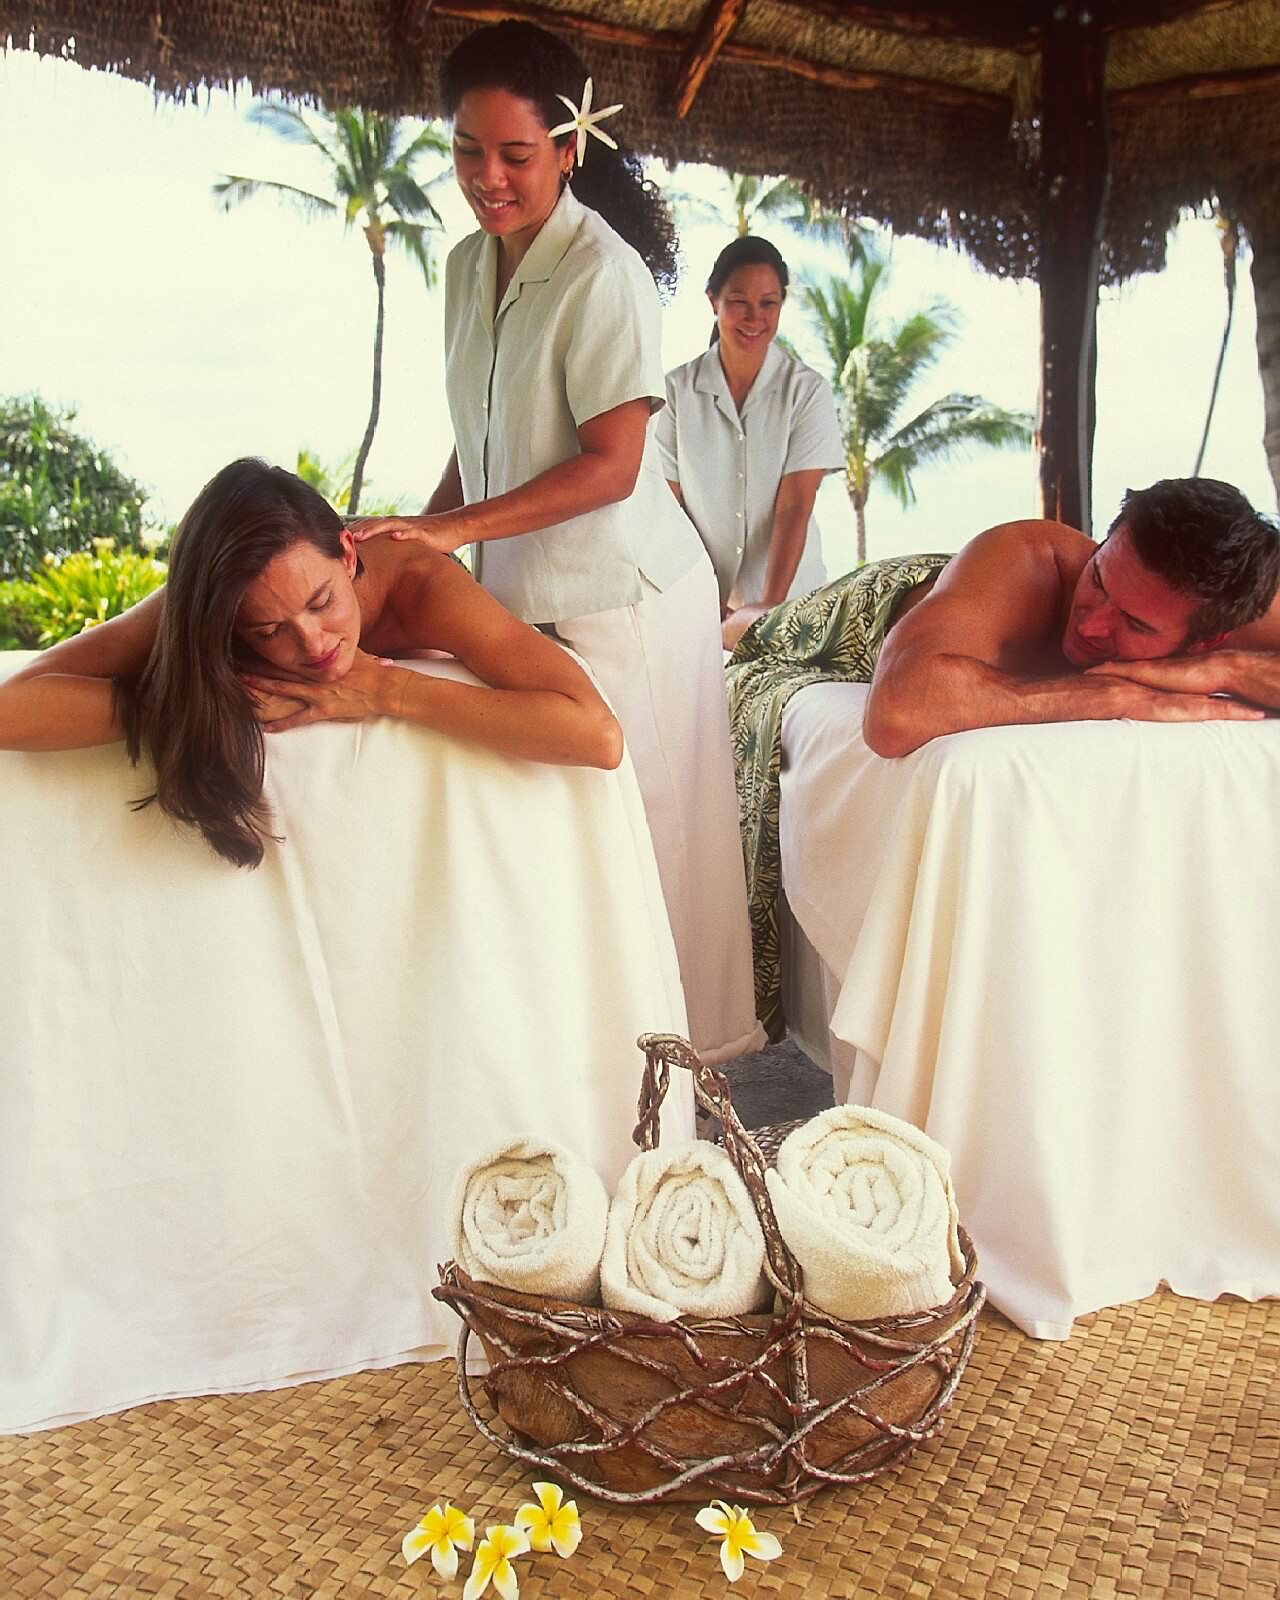 Four Seasons Resort Maui guests can luxuriate with couples massages in one of the Resort’s oceanside authentic Hawaiian hales